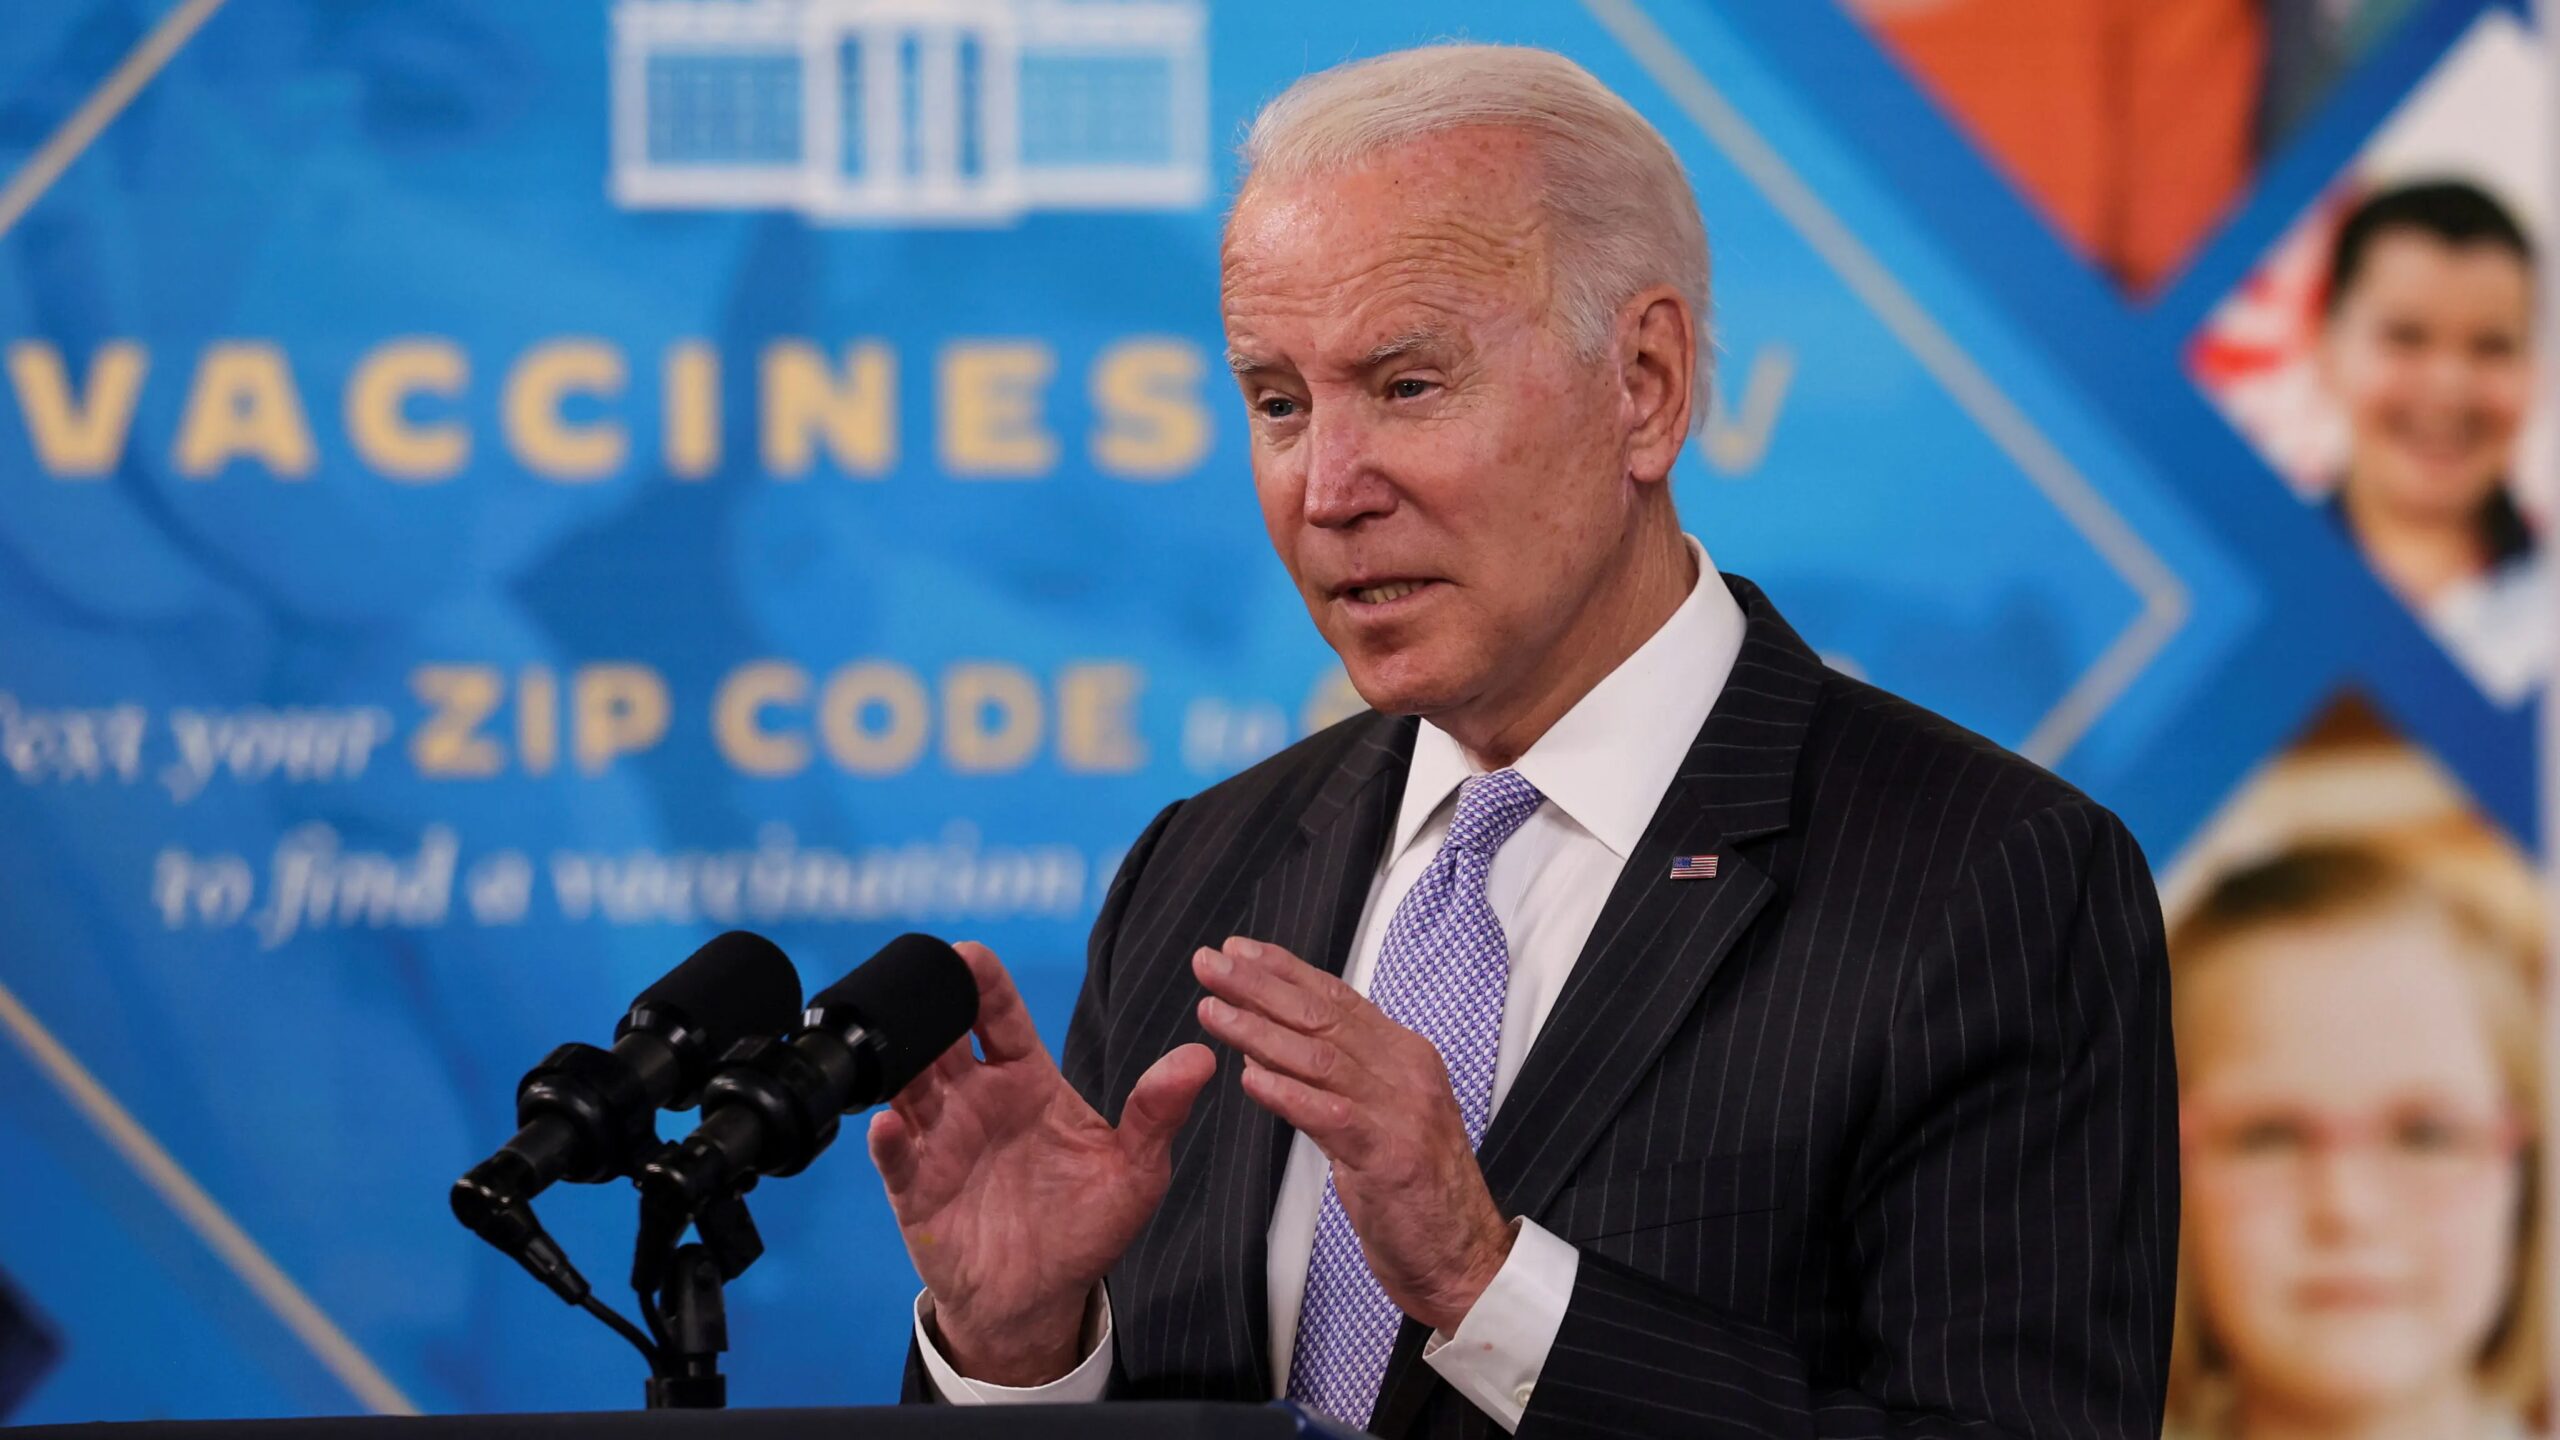 Biden offers support for Indigenous nations to compete under collective flag in 2028 Olympics